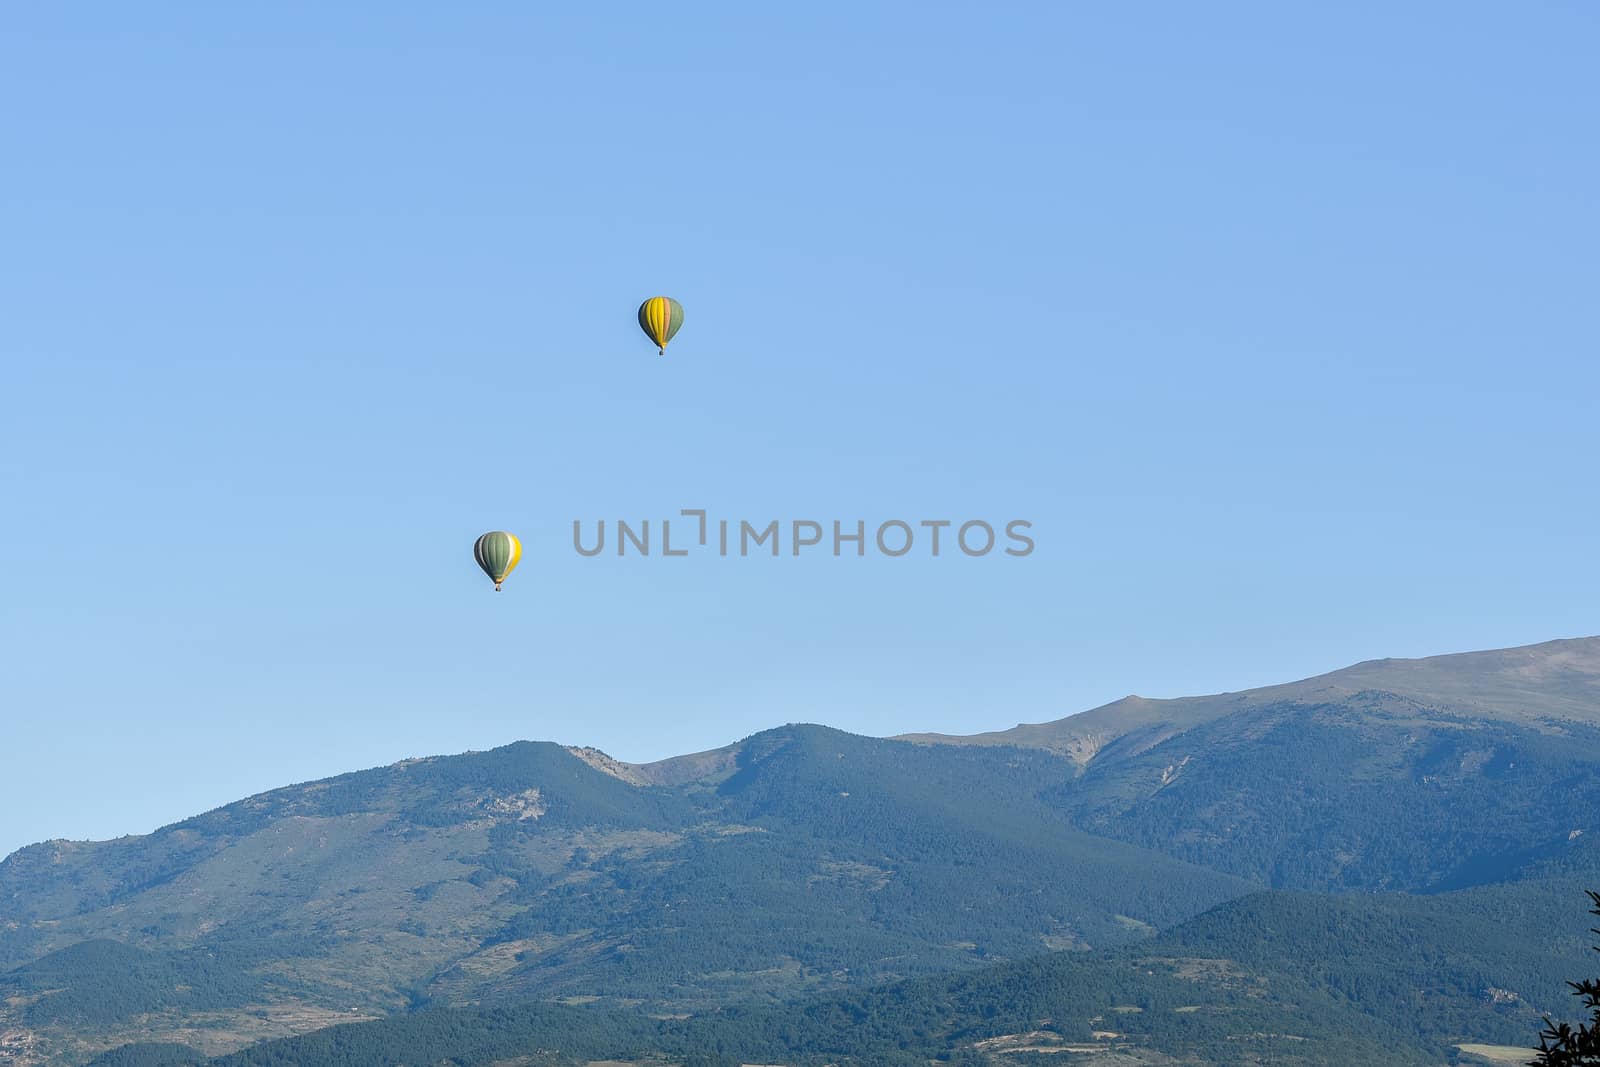 Colorful hot air balloons flying over the mountain in Puig Cerda by martinscphoto